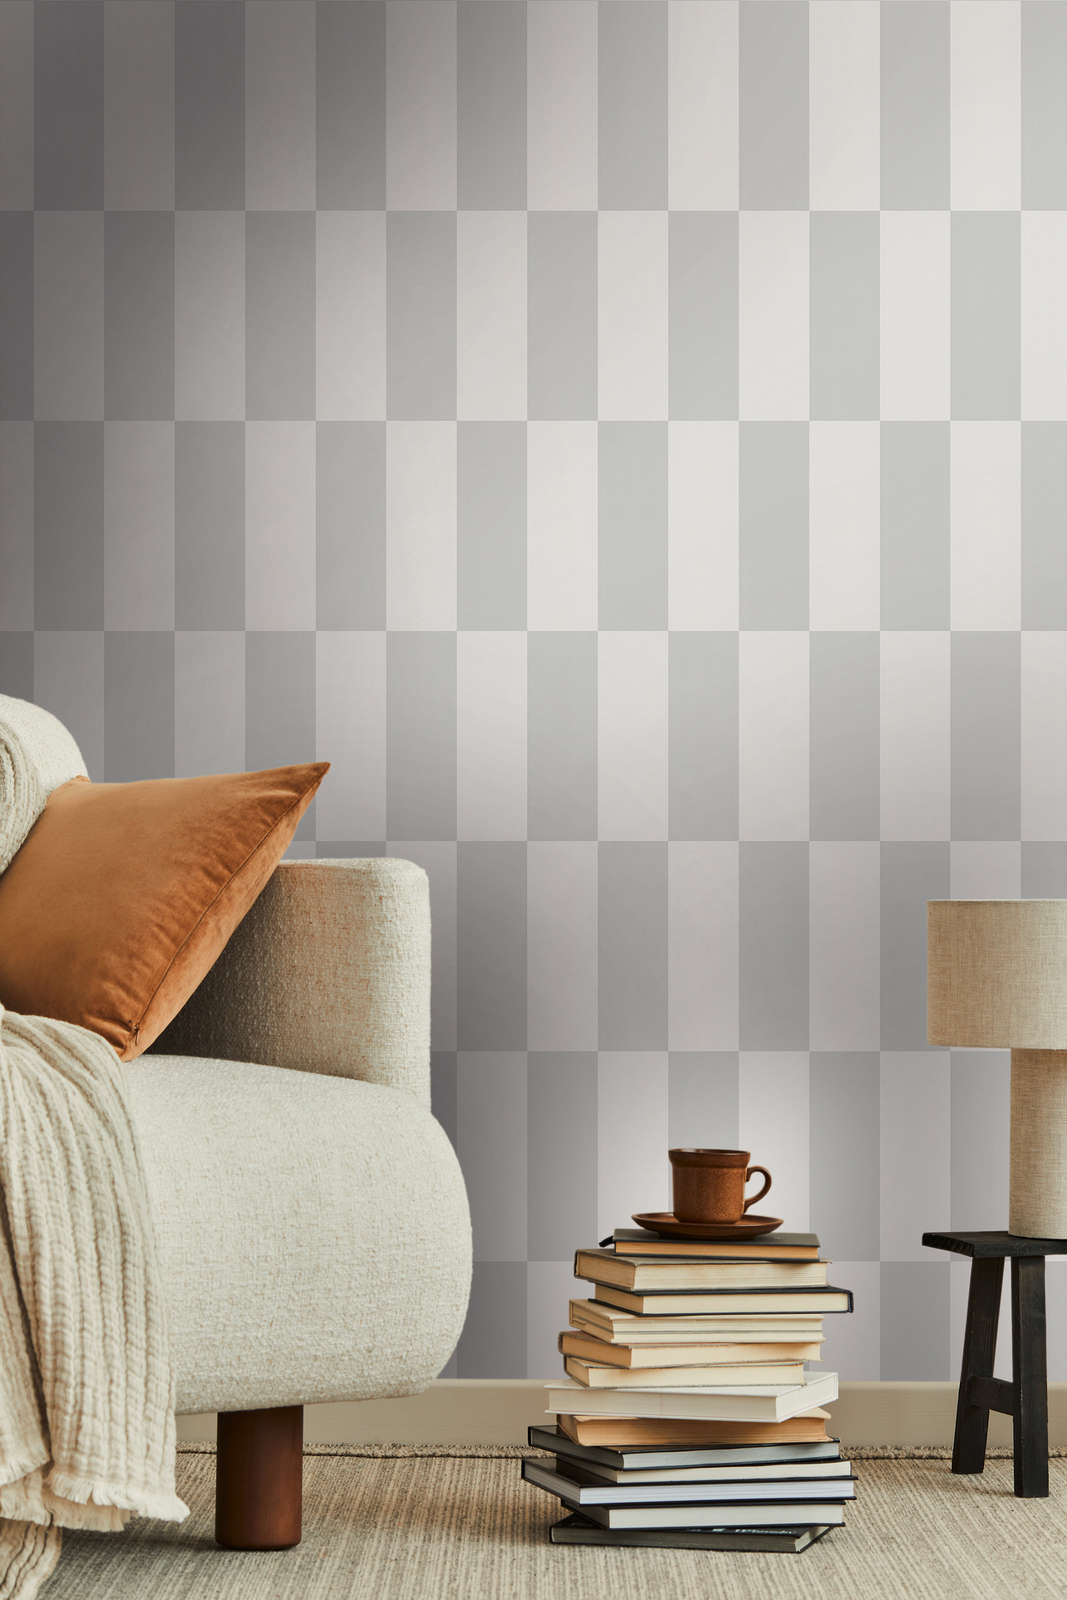             Non-woven wallpaper with graphic square pattern - grey
        